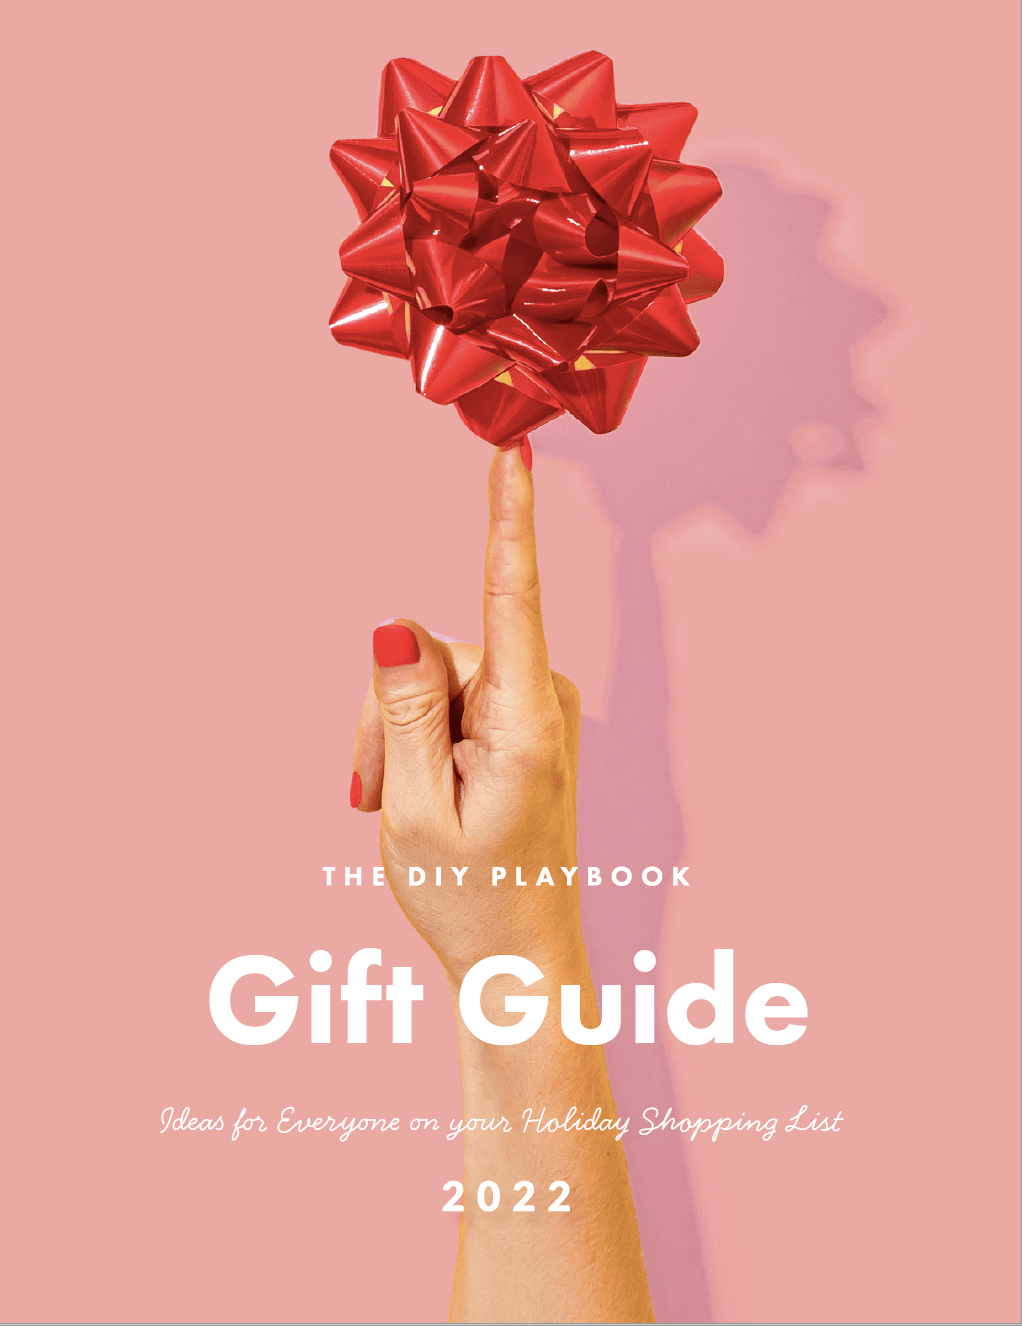 holiday gift guide 2022